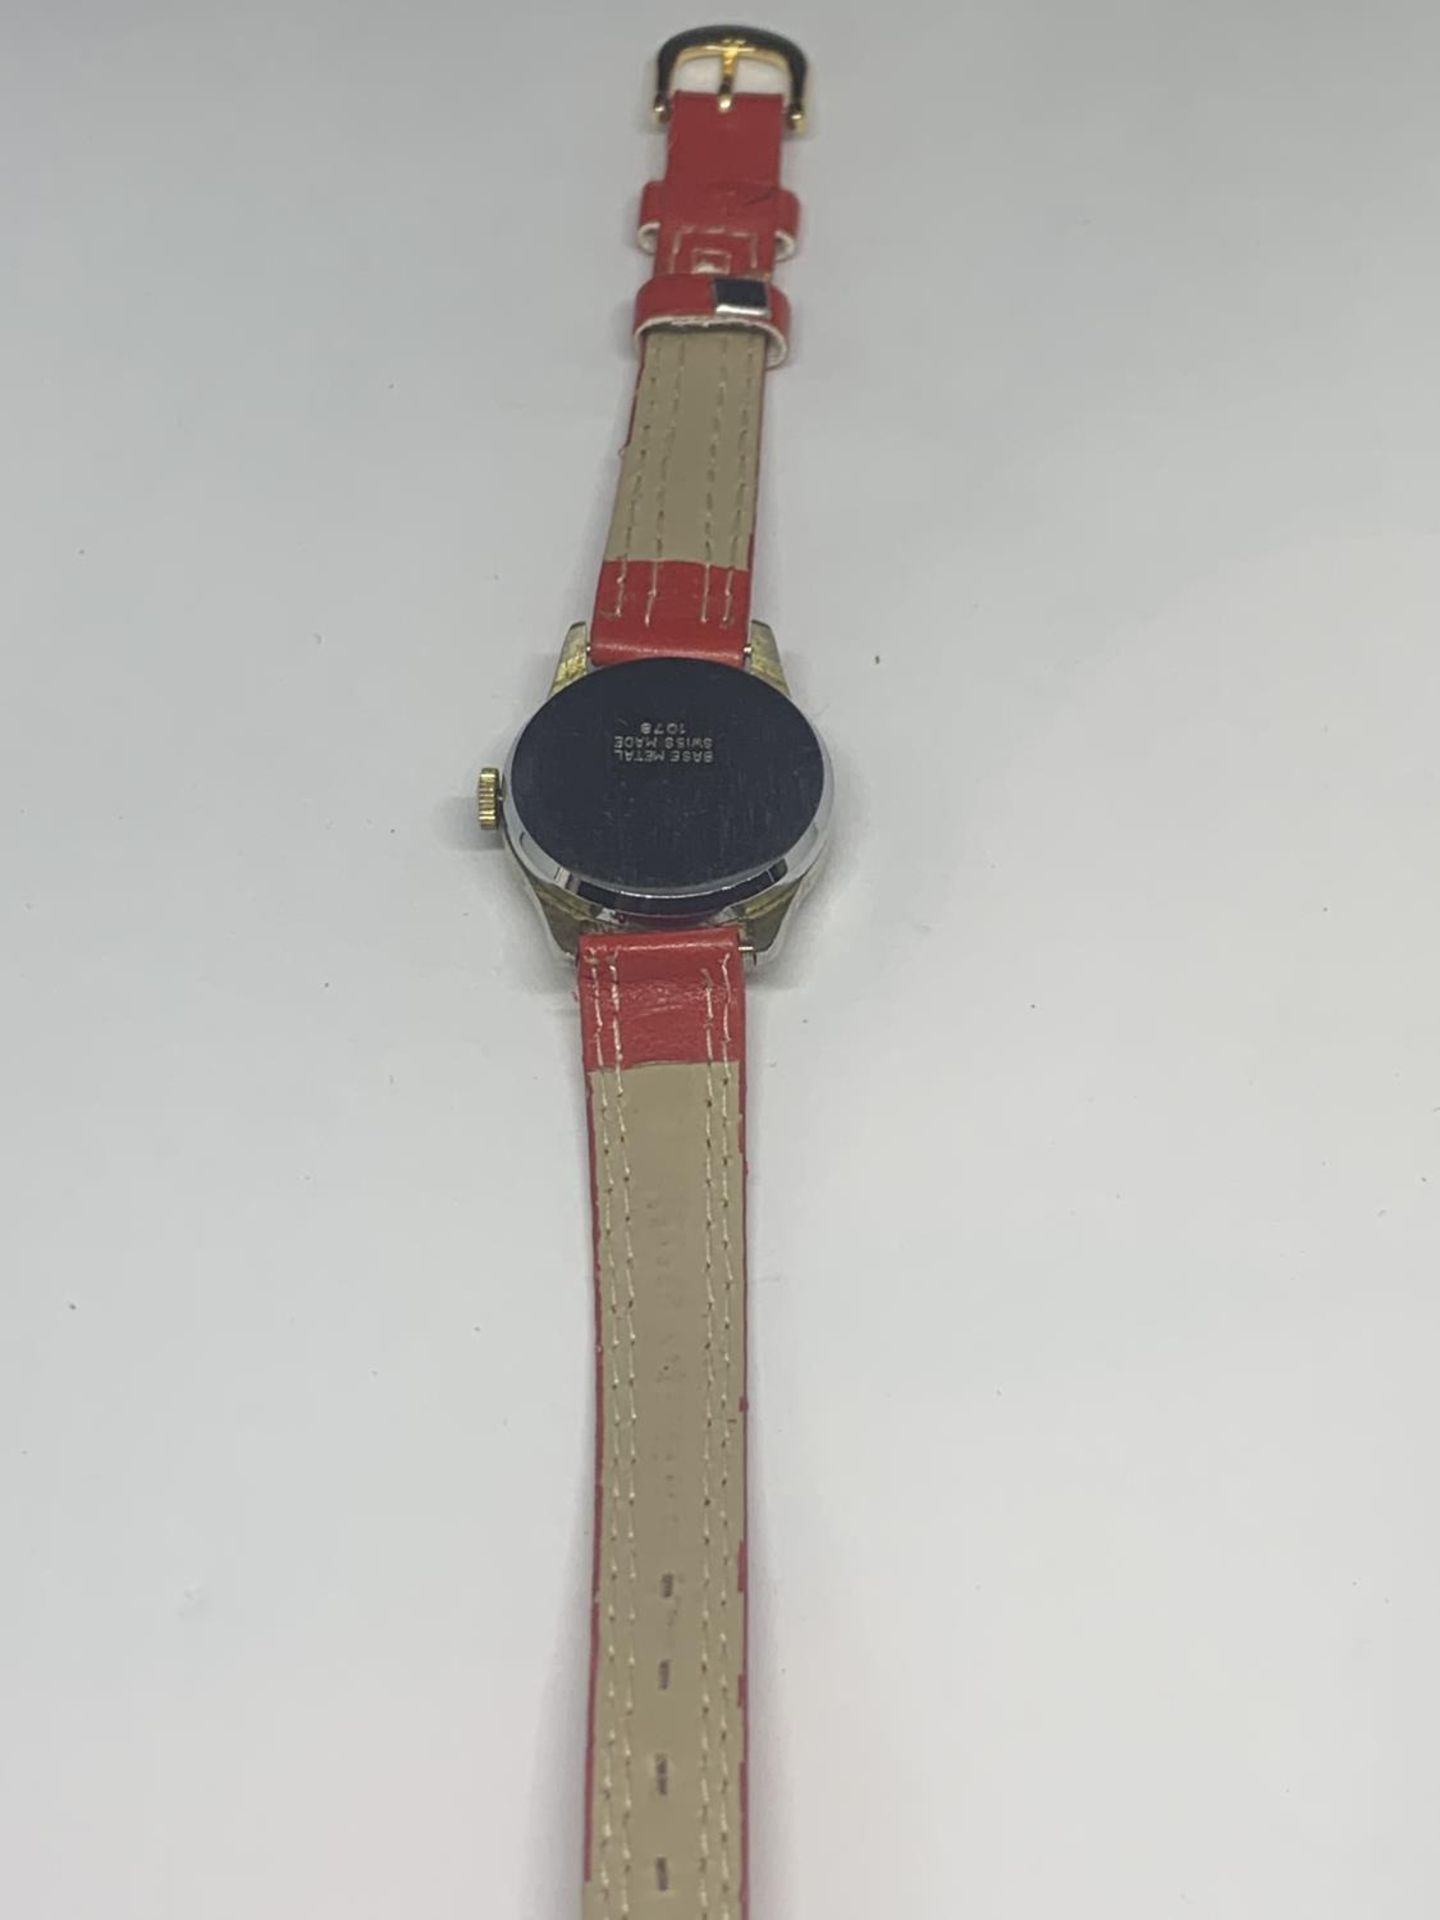 A CHILDS SEE SAW WRIST WATCH - Image 3 of 3